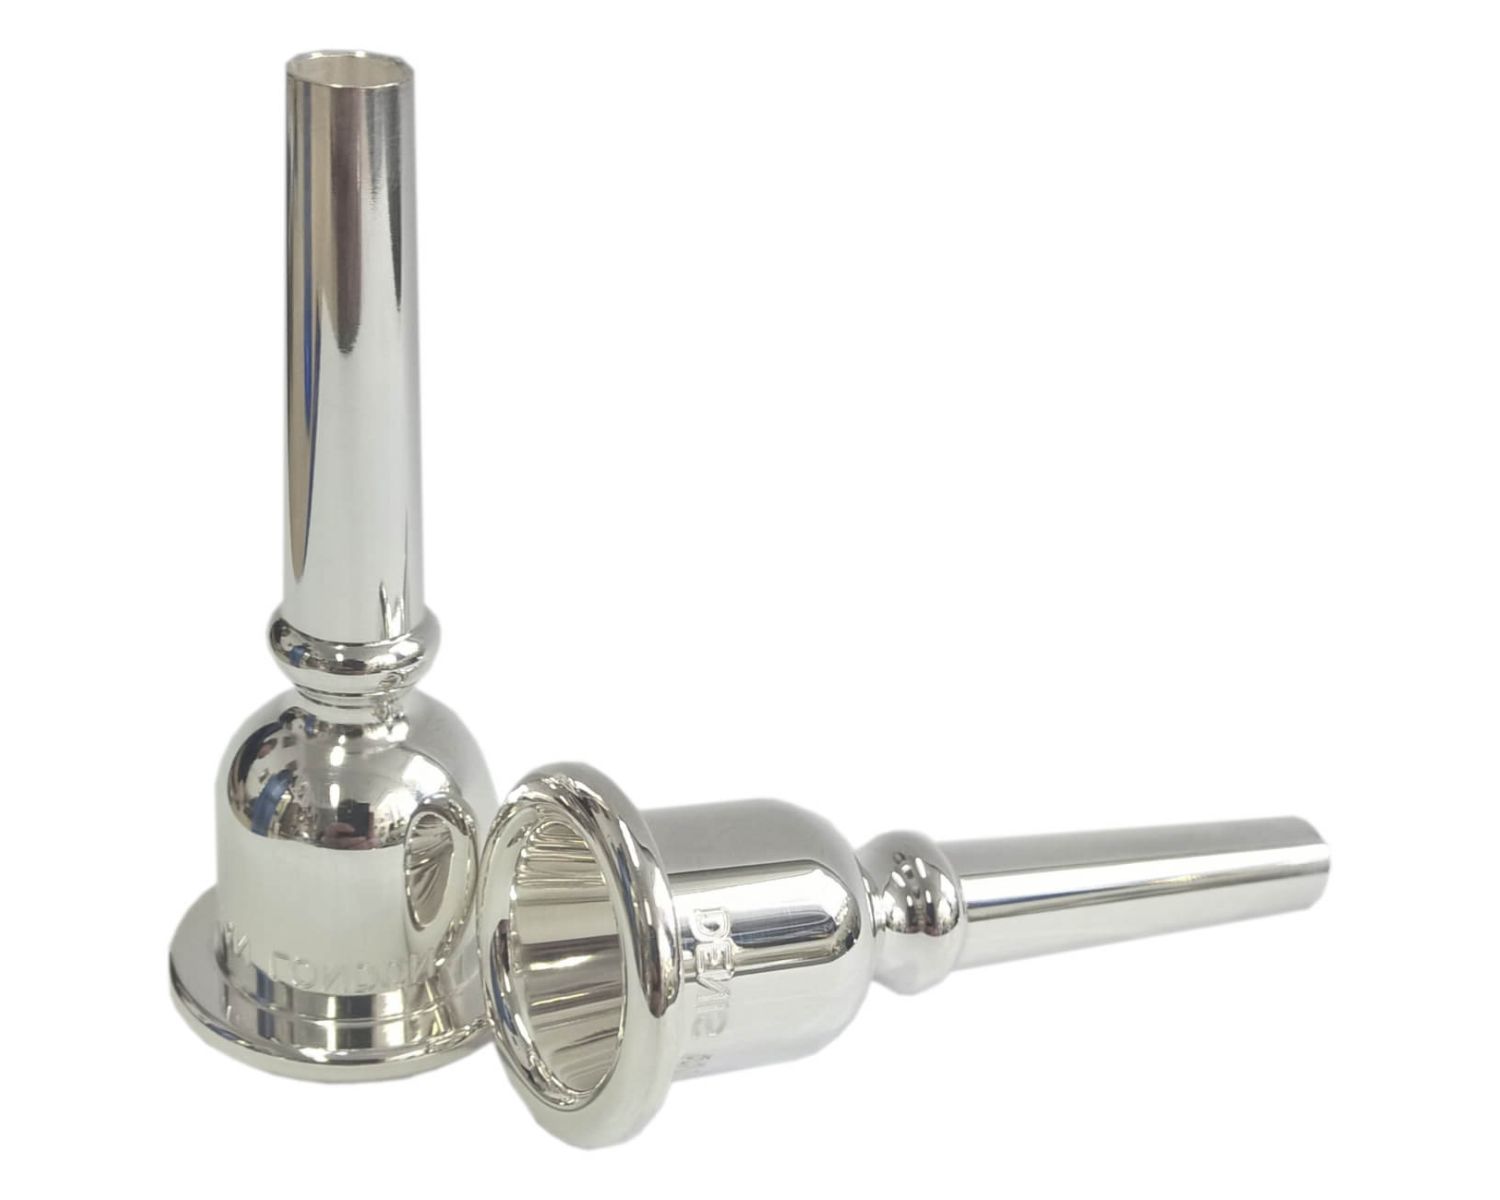 Review of French Horn Mouthpiece